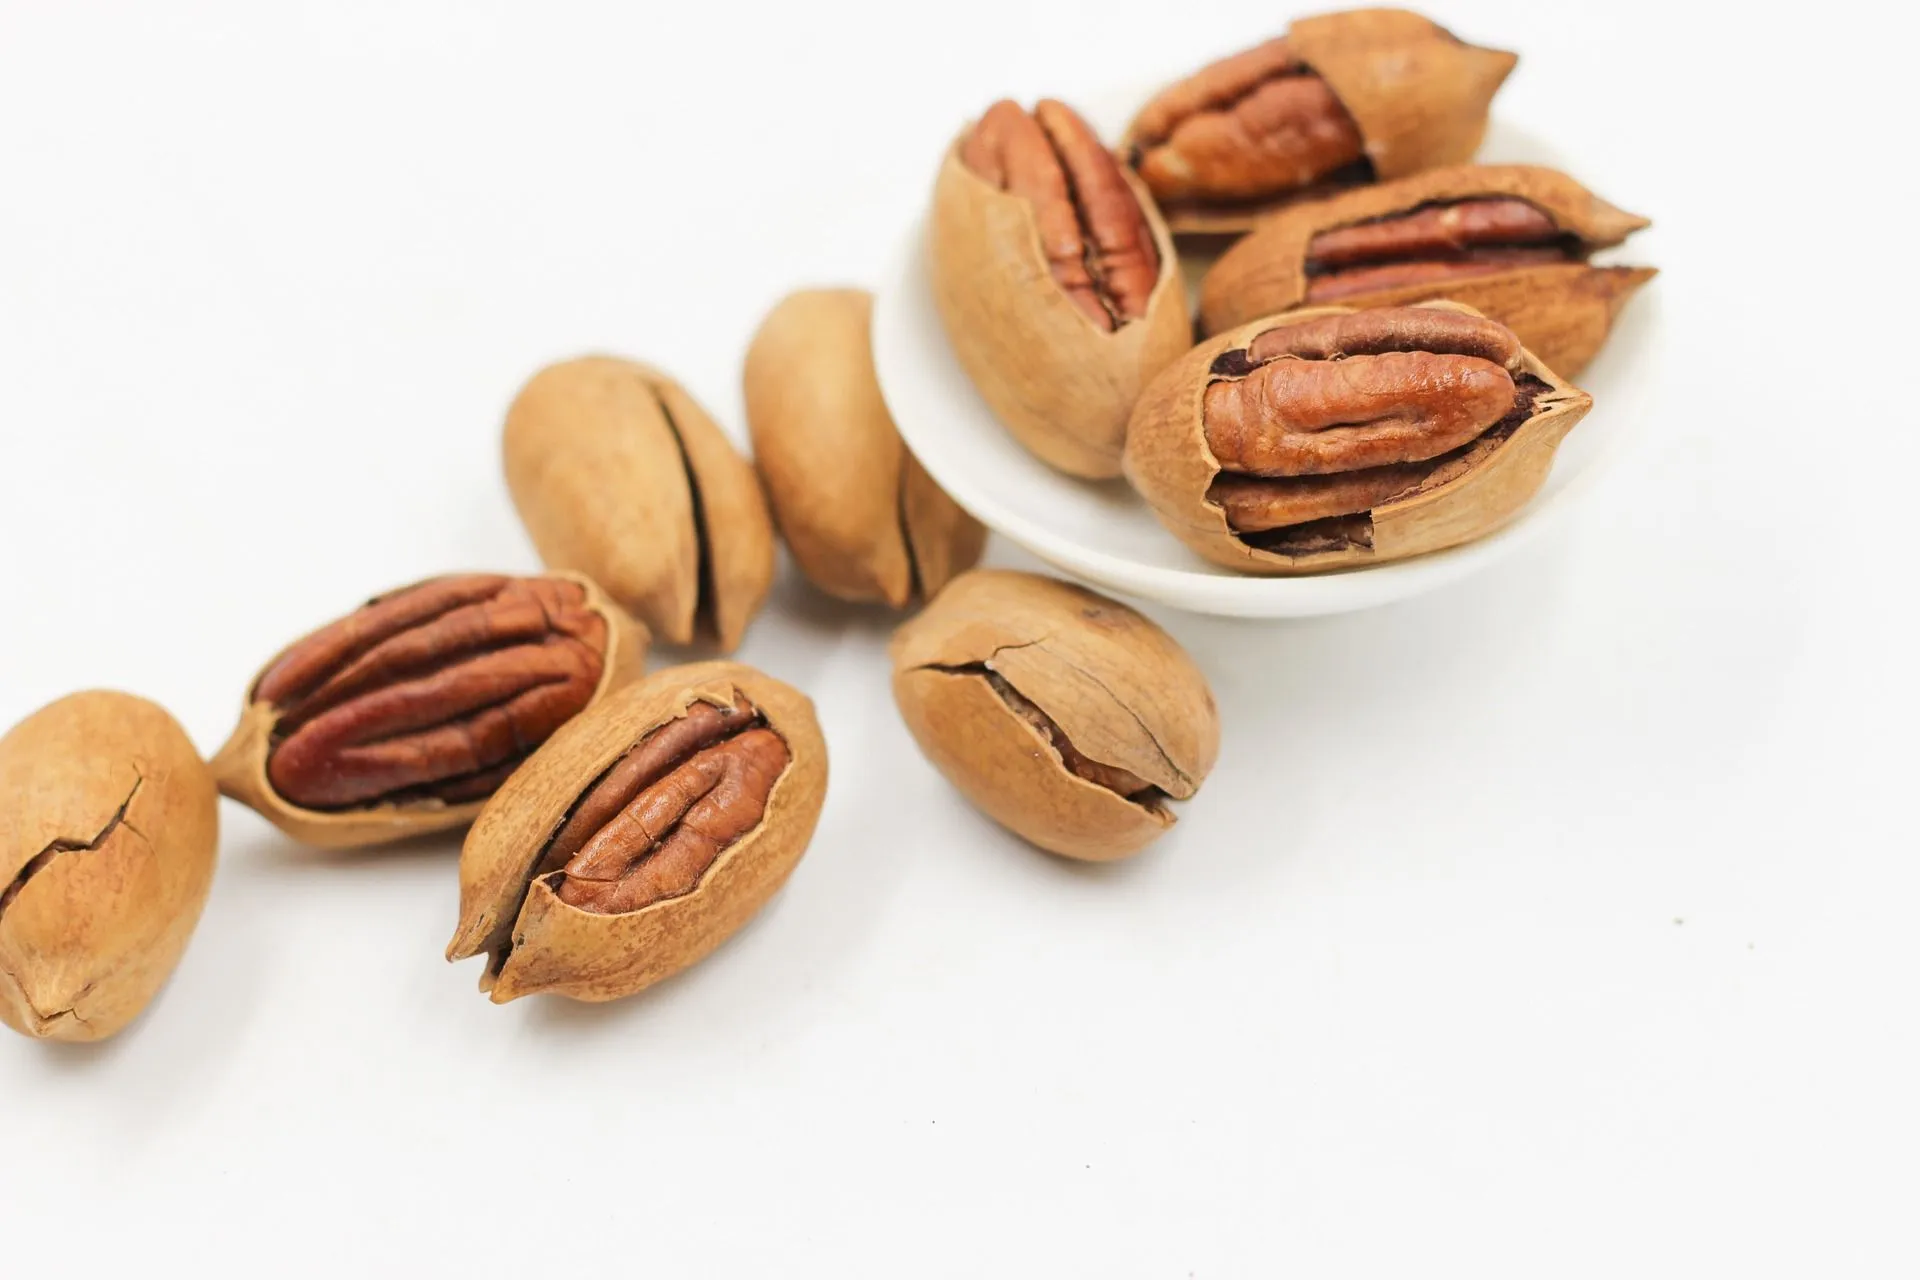 Pecan nutrition facts maintain that pecan trees only produce nuts every two years and are related to walnuts.